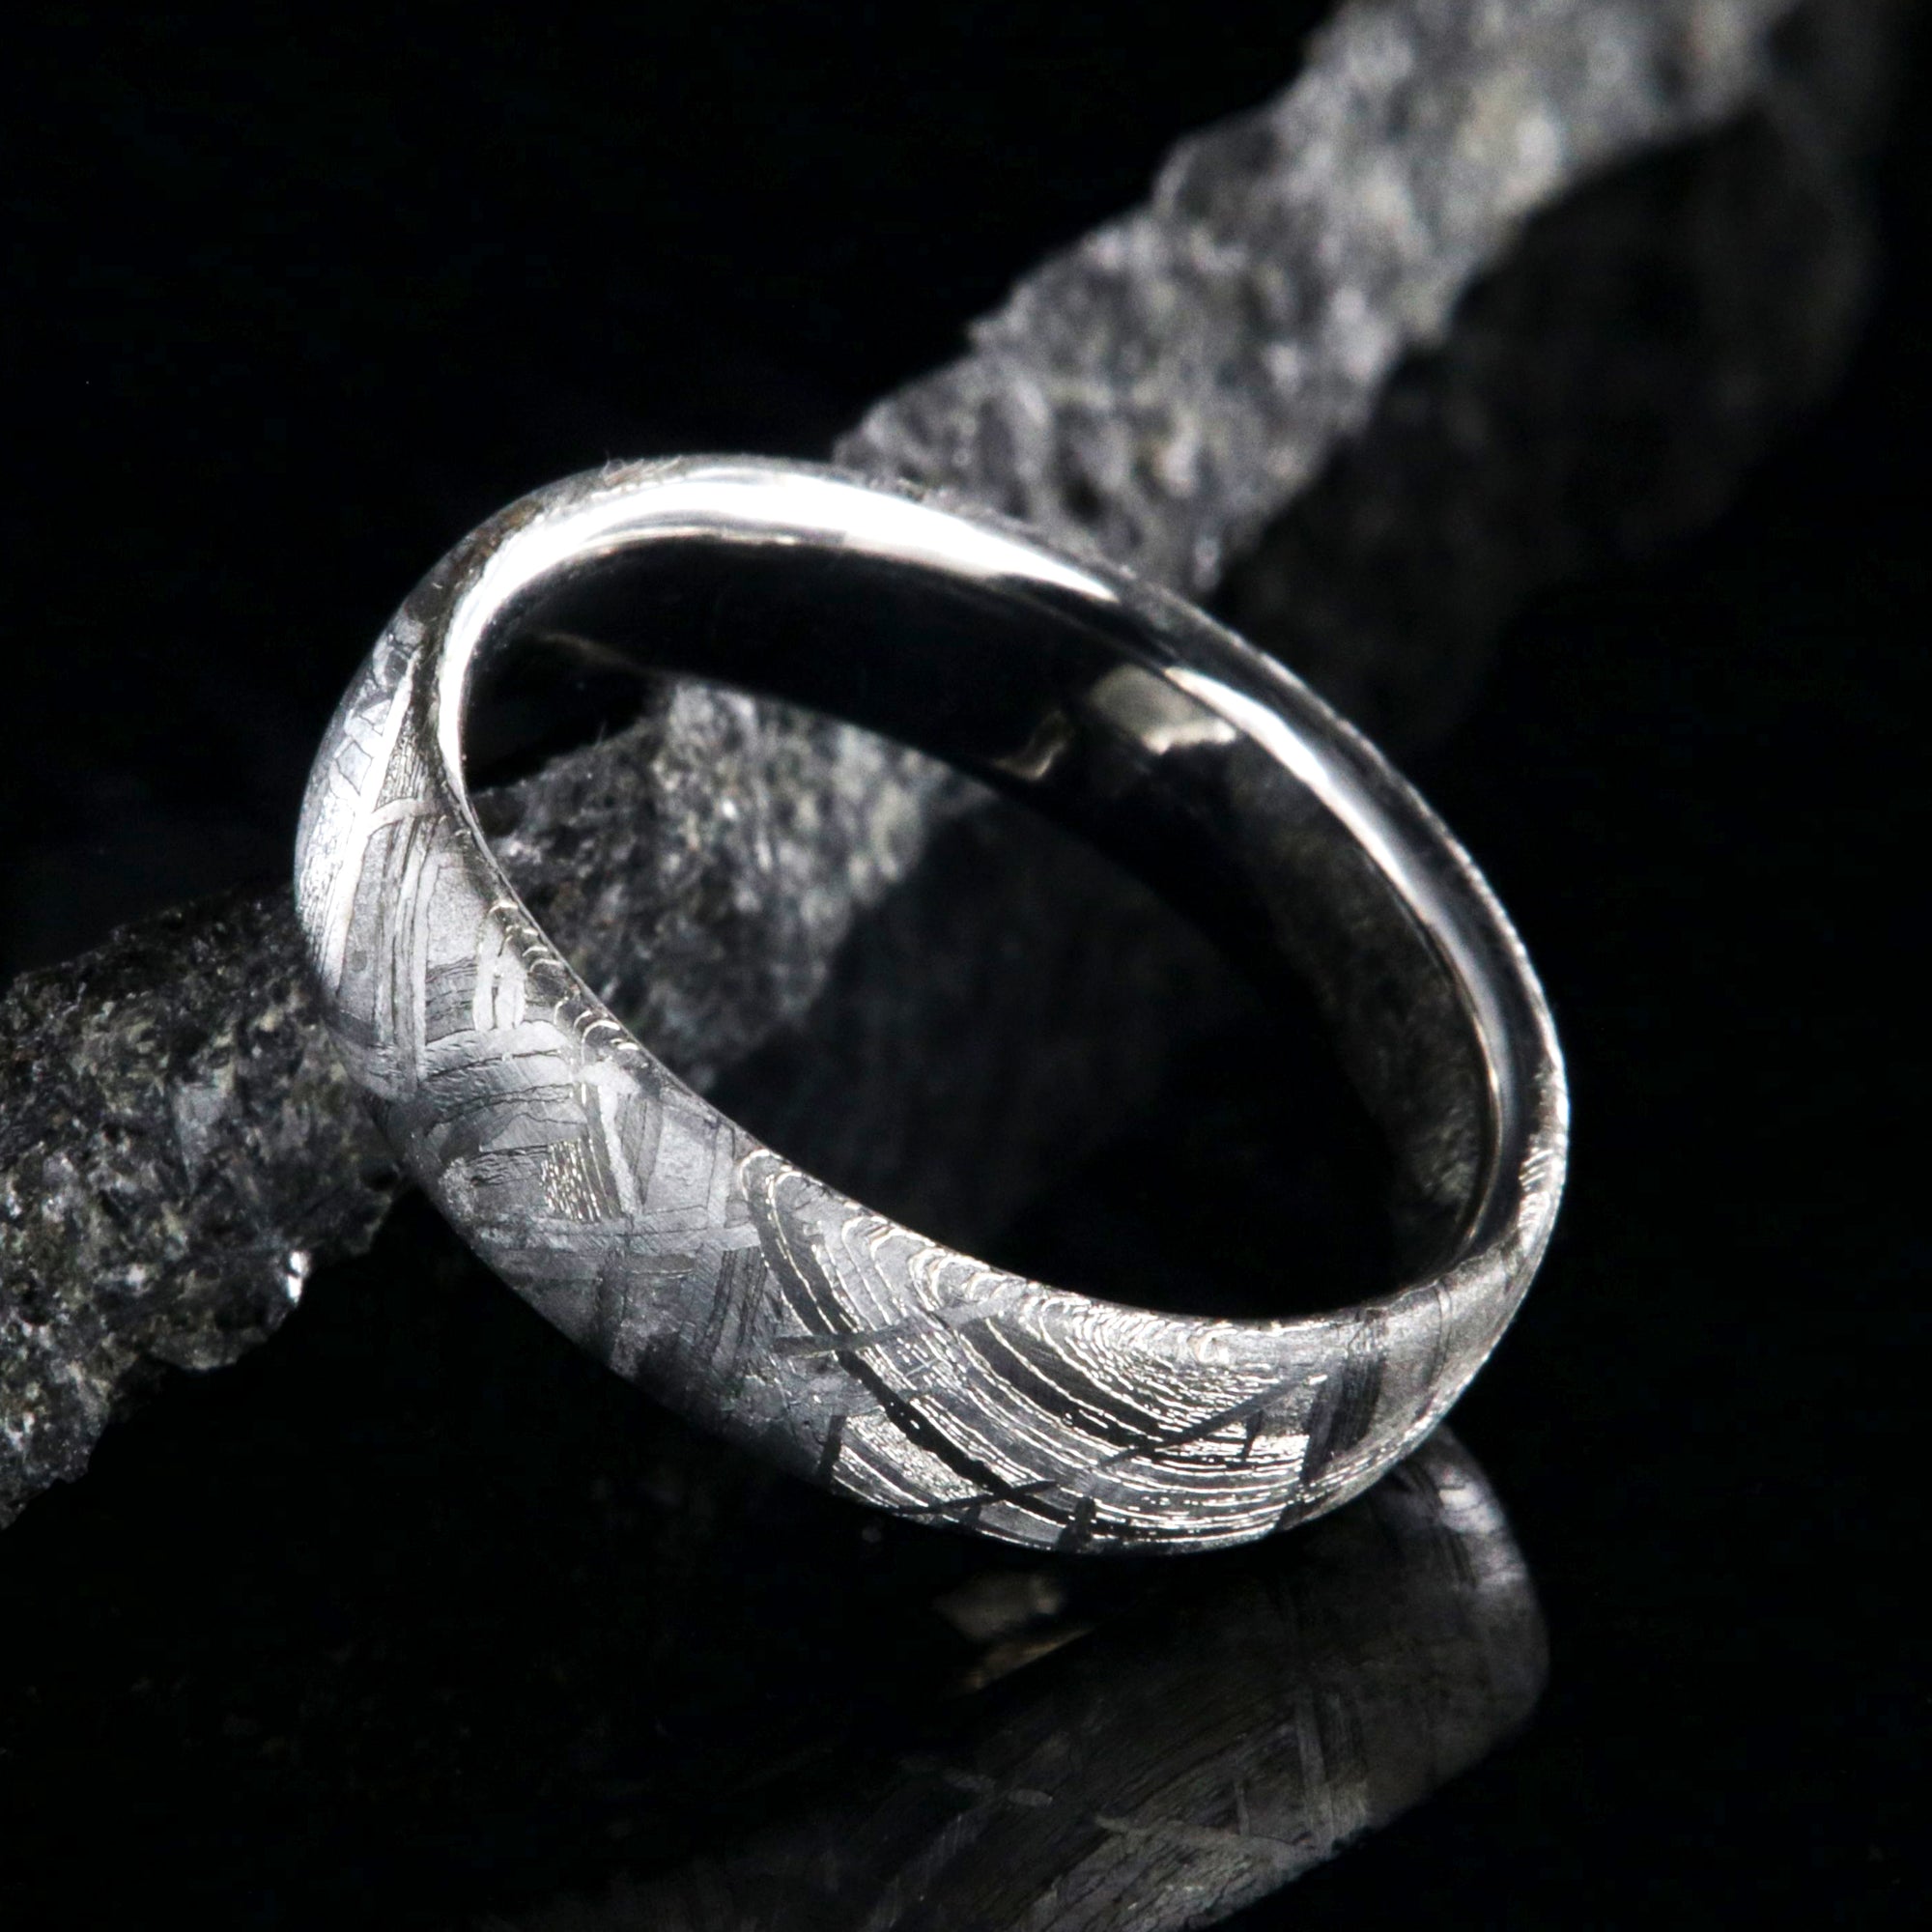 6mm wide meteorite ring made with Muonionalusta meteorite and a polished cobalt sleeve